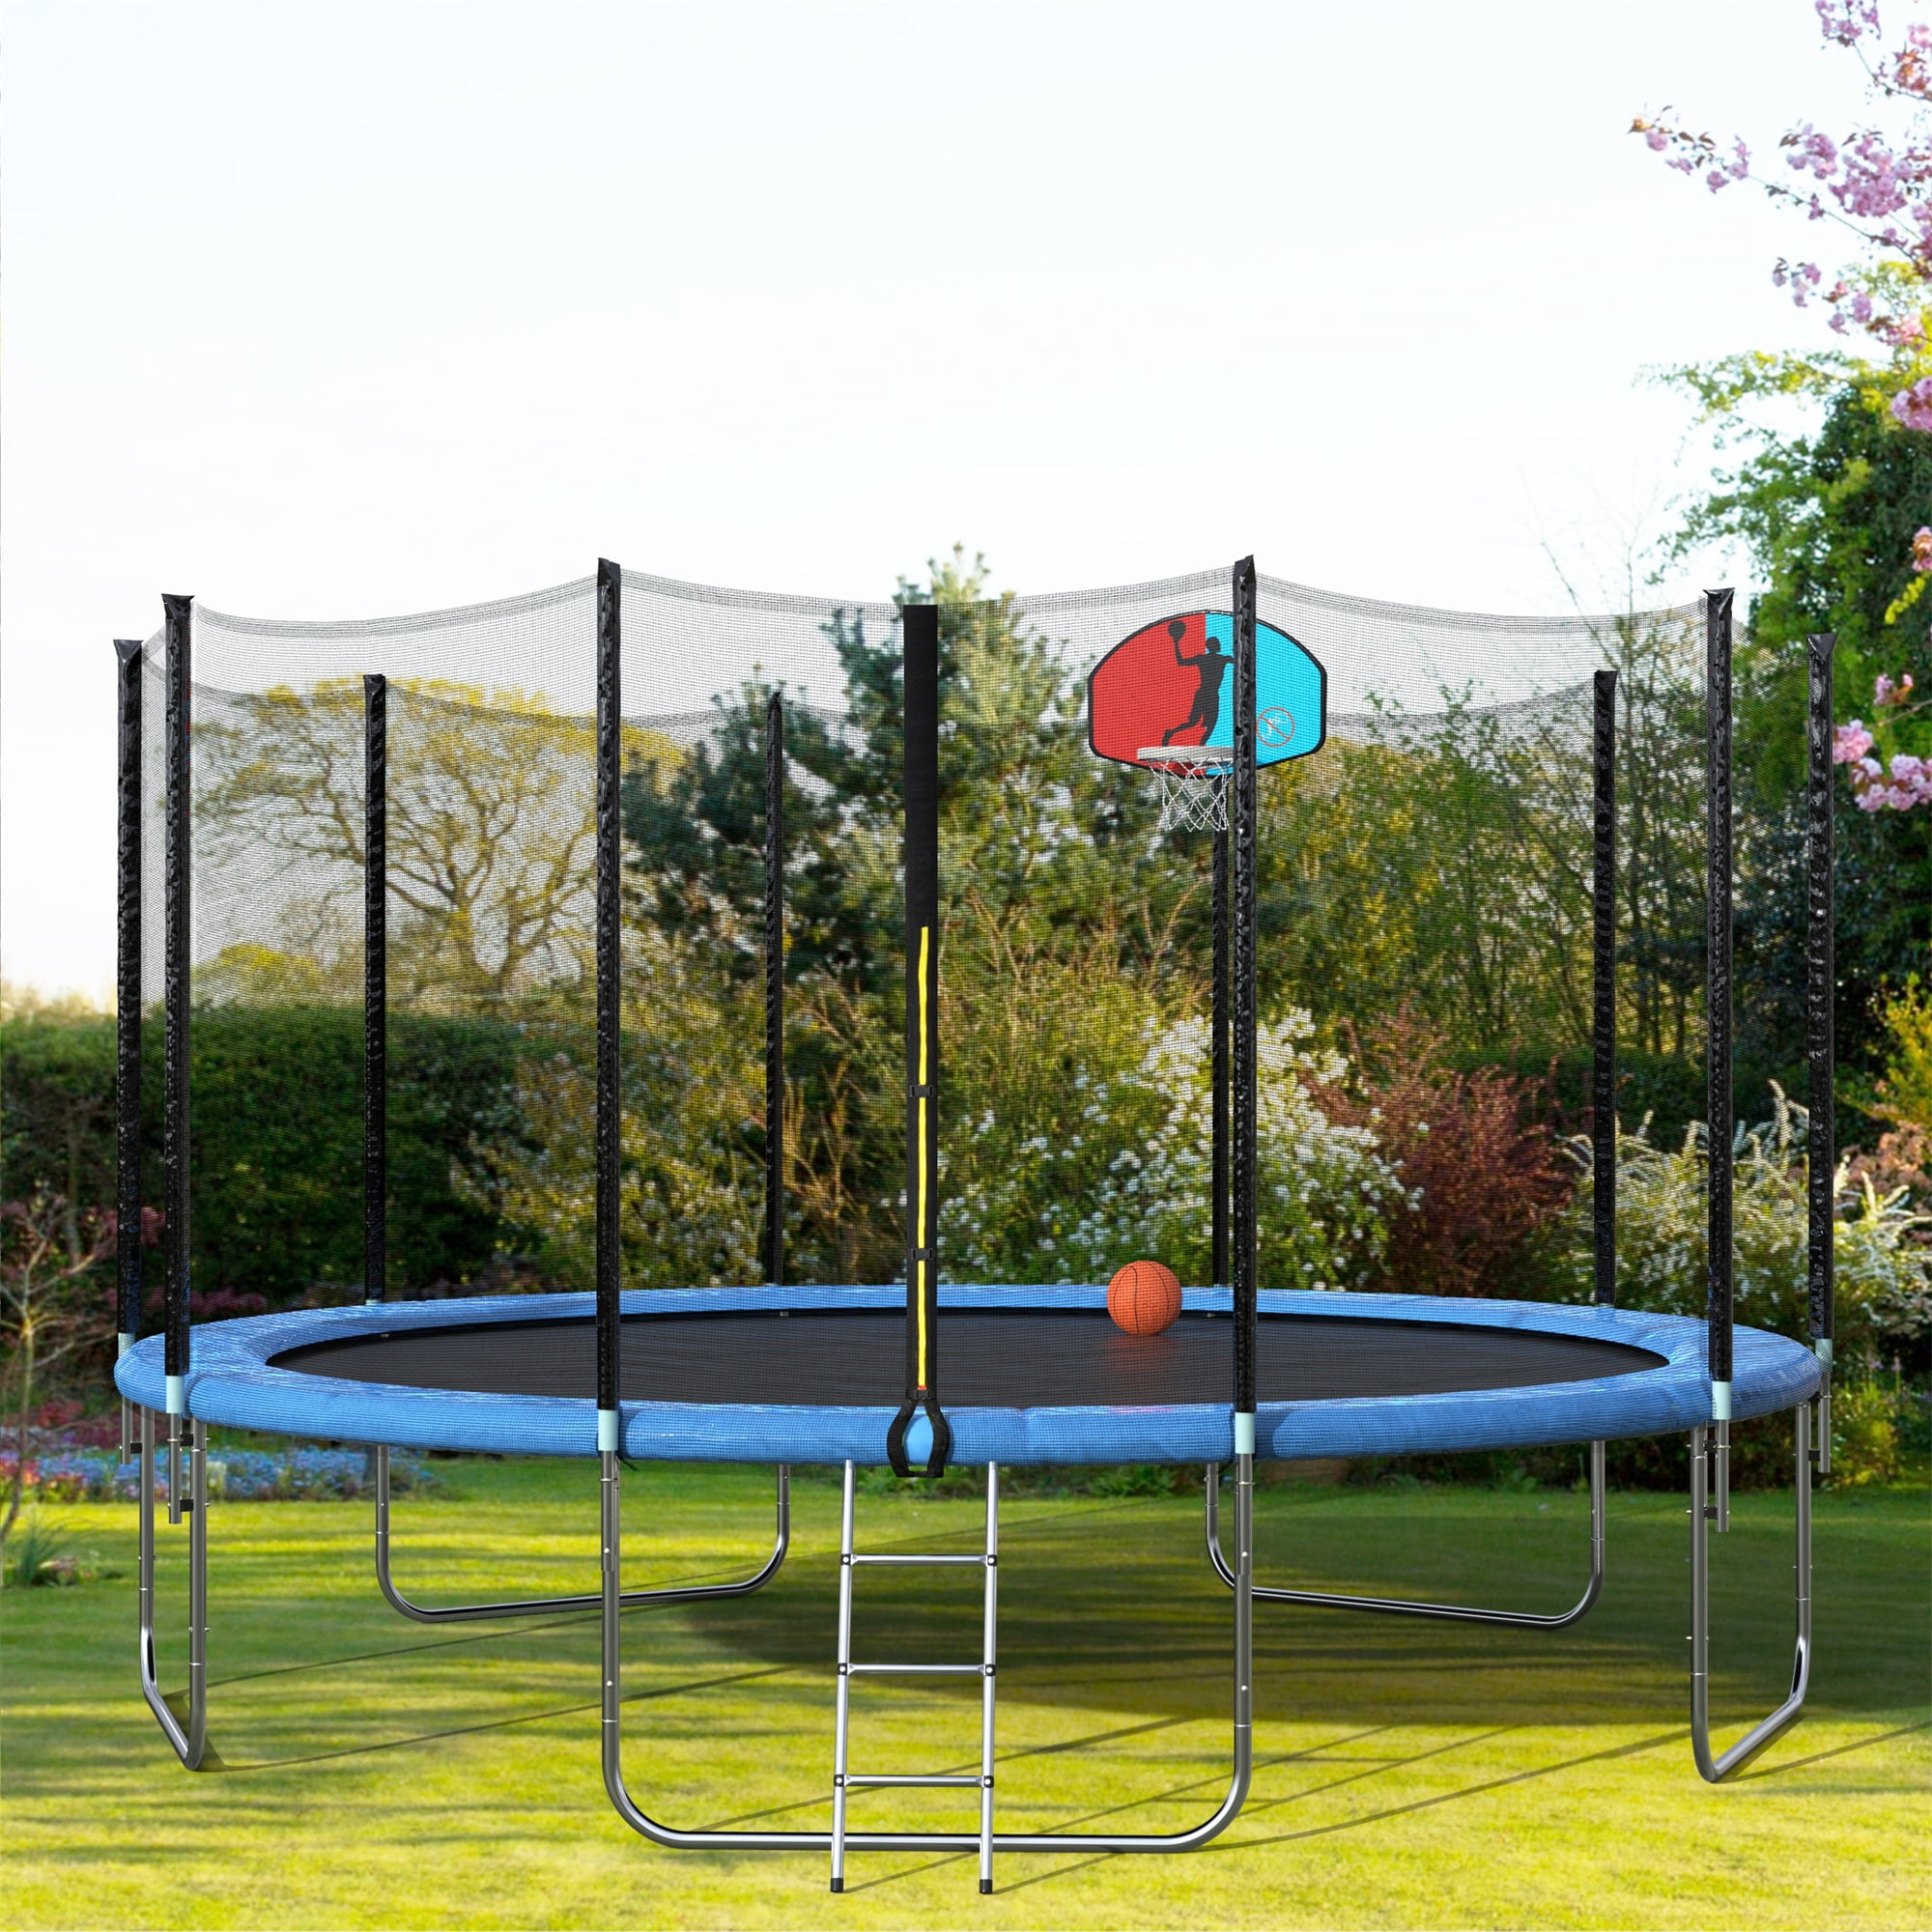 15FT Kids Outdoor Trampoline with Enclosure Net Basketball Hoops Ladder Round US 